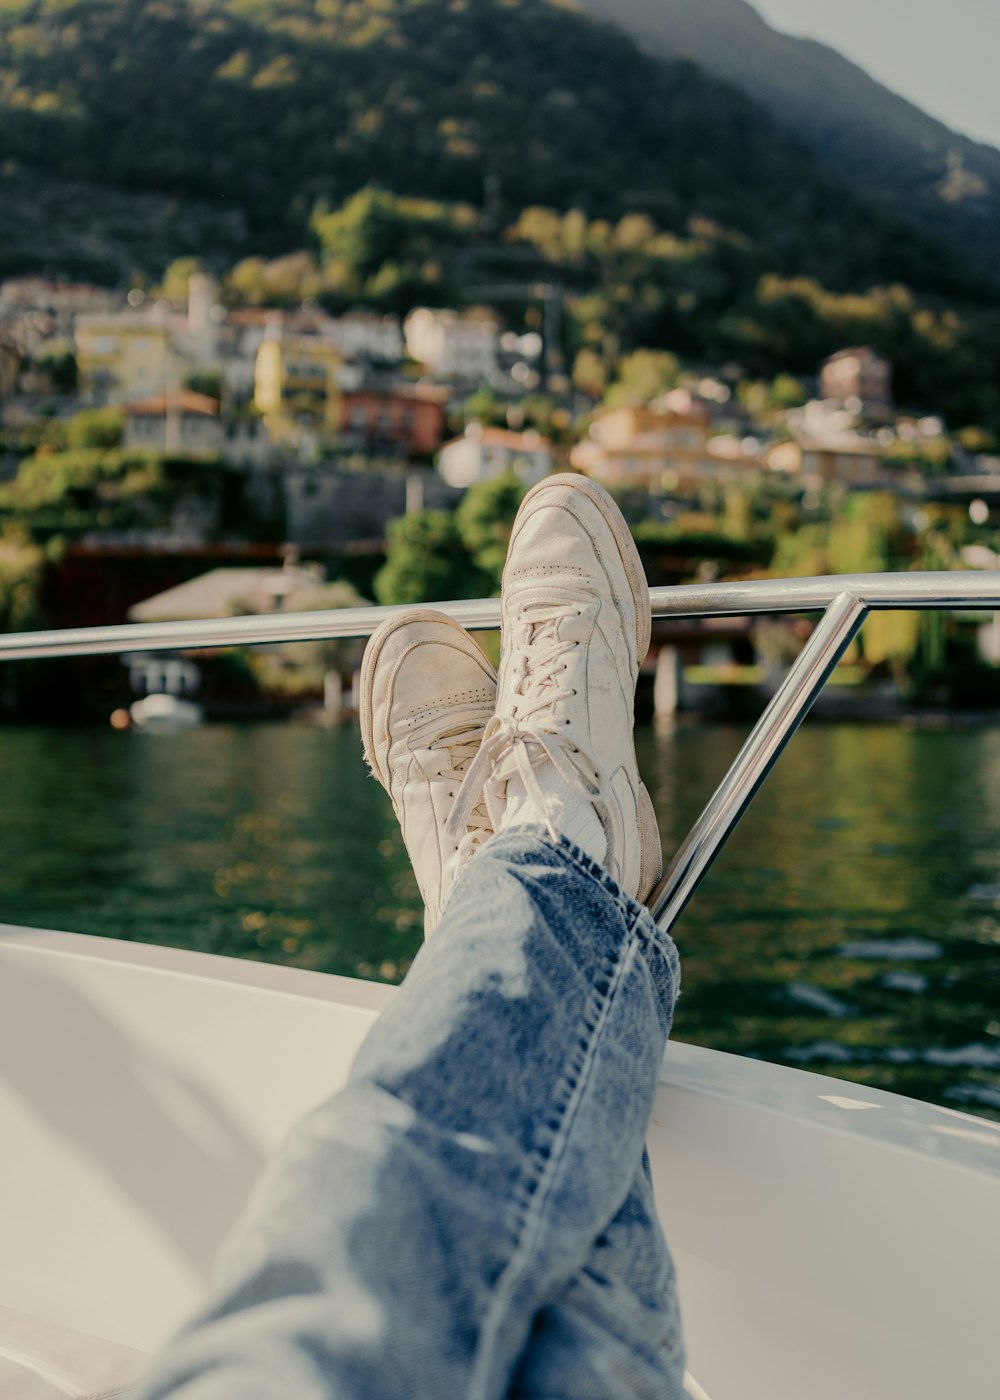 a person's feet resting on the edge of a boat